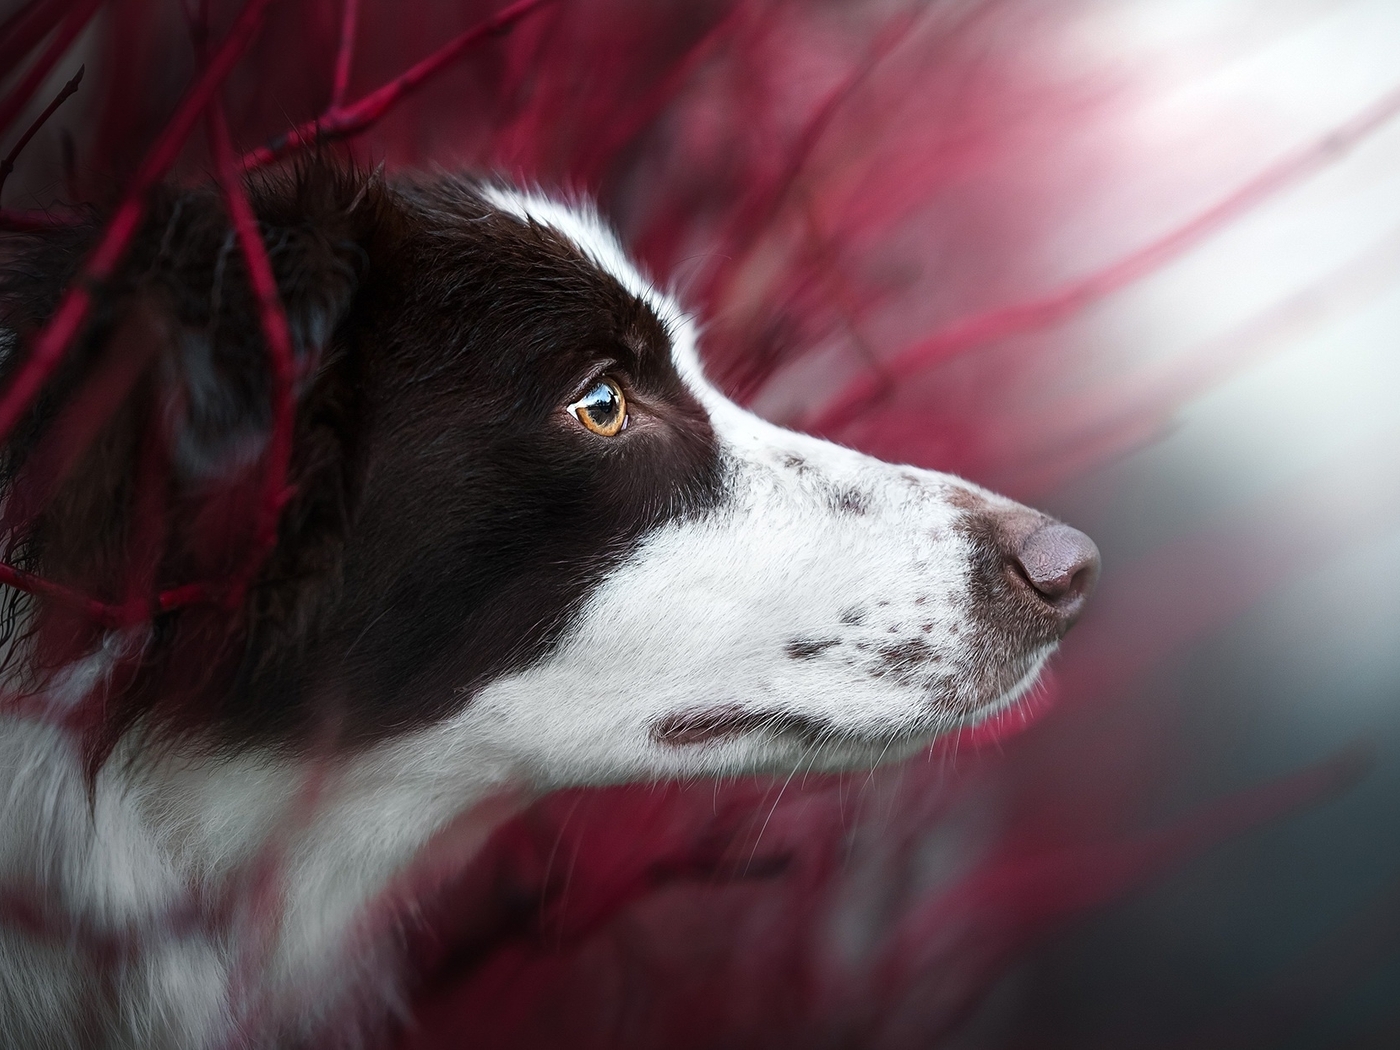 Image: Dog, border collie, breed, snout, watching, blurred background